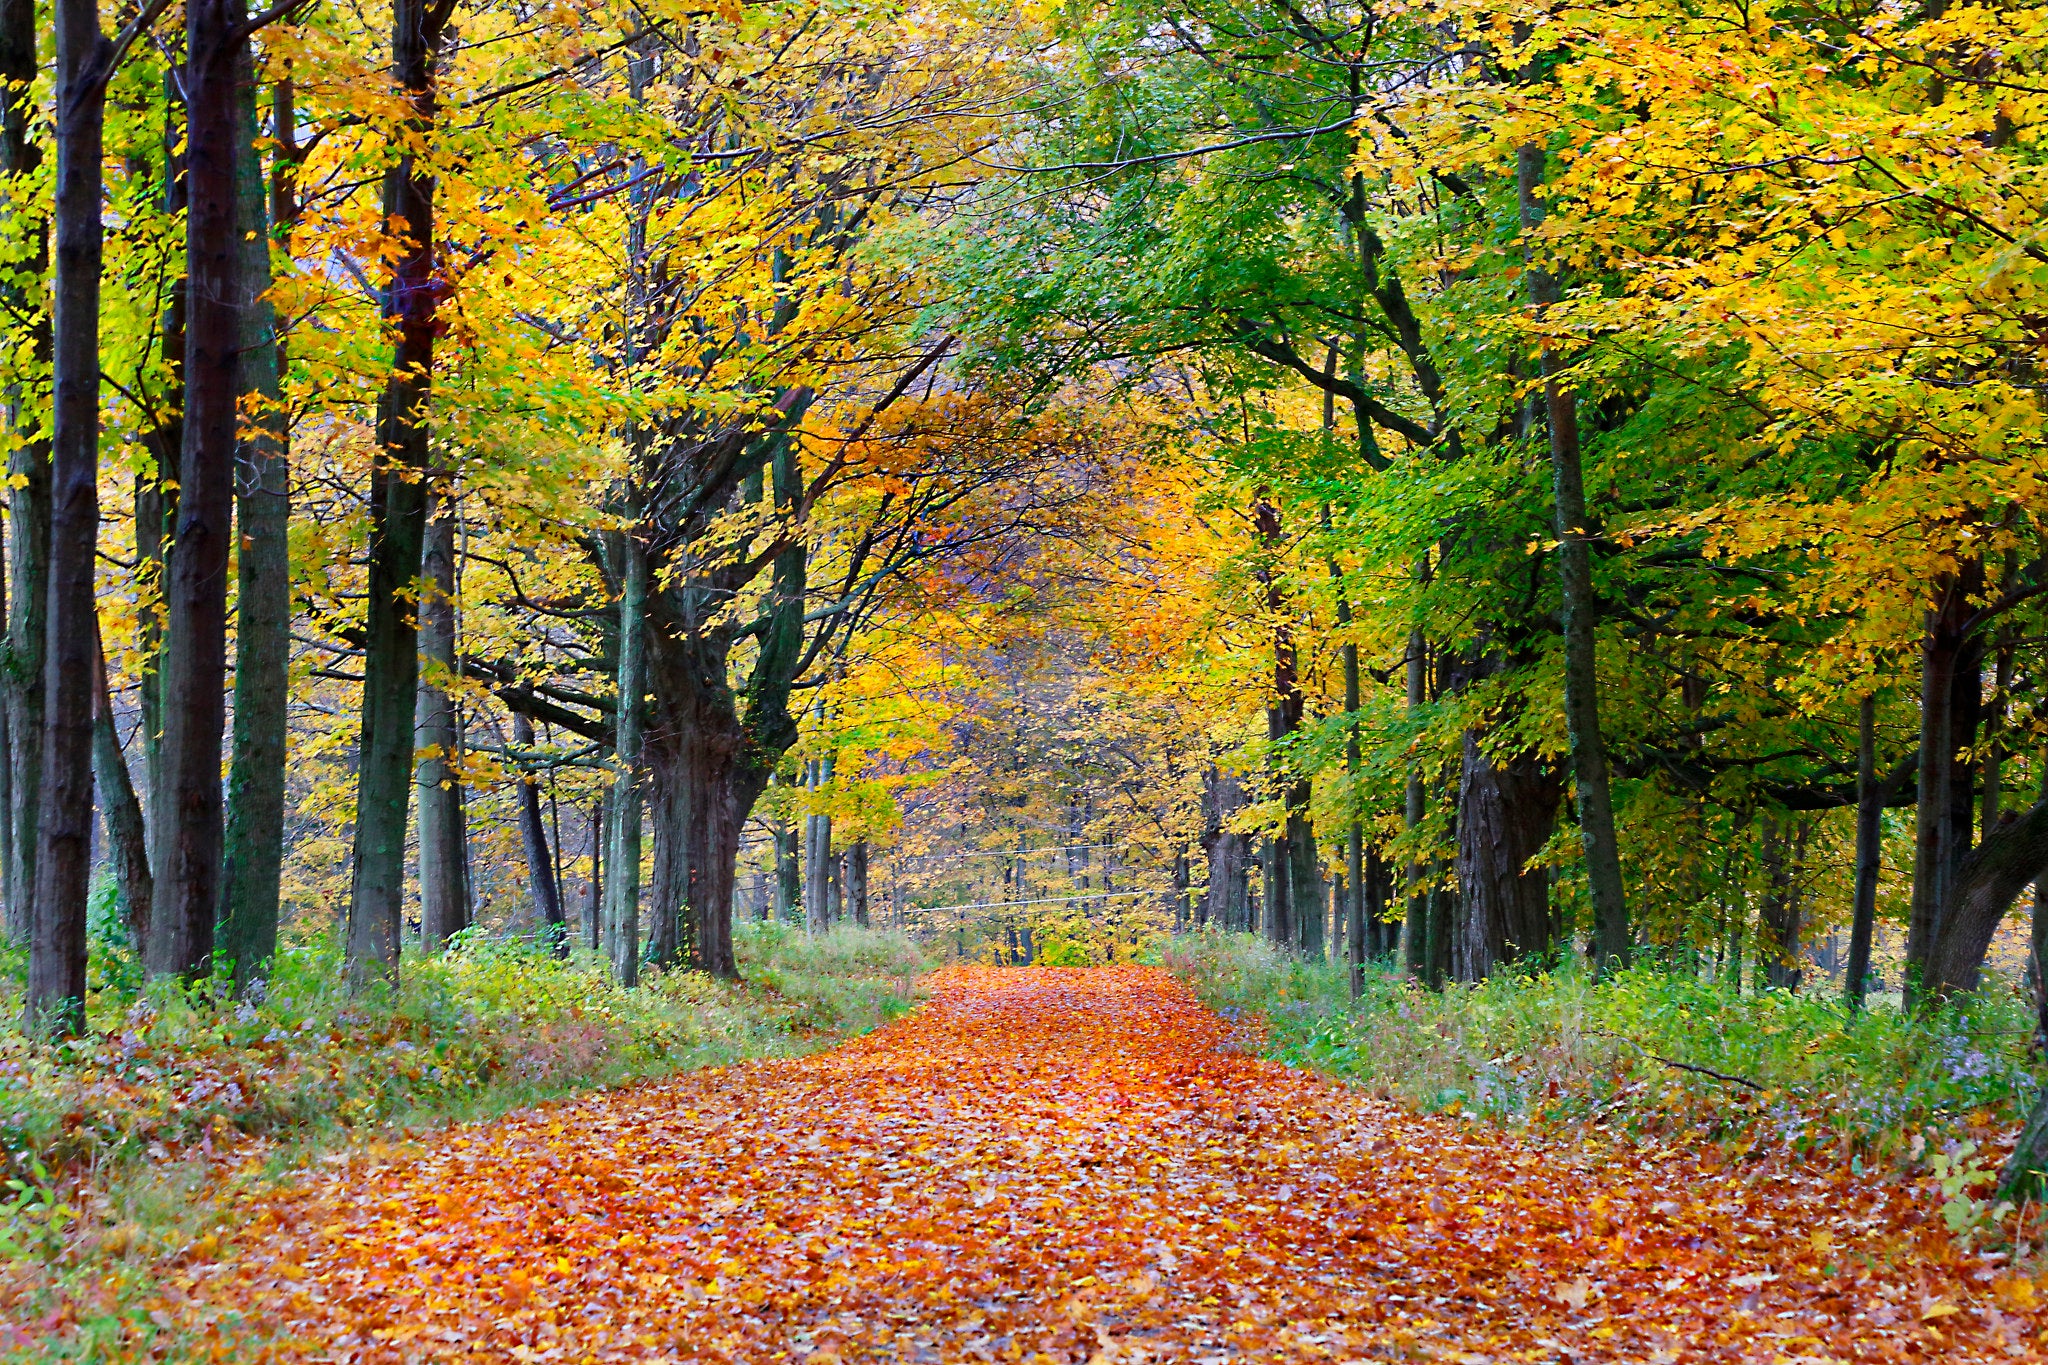 8 places to see fall foliage in Massachusetts